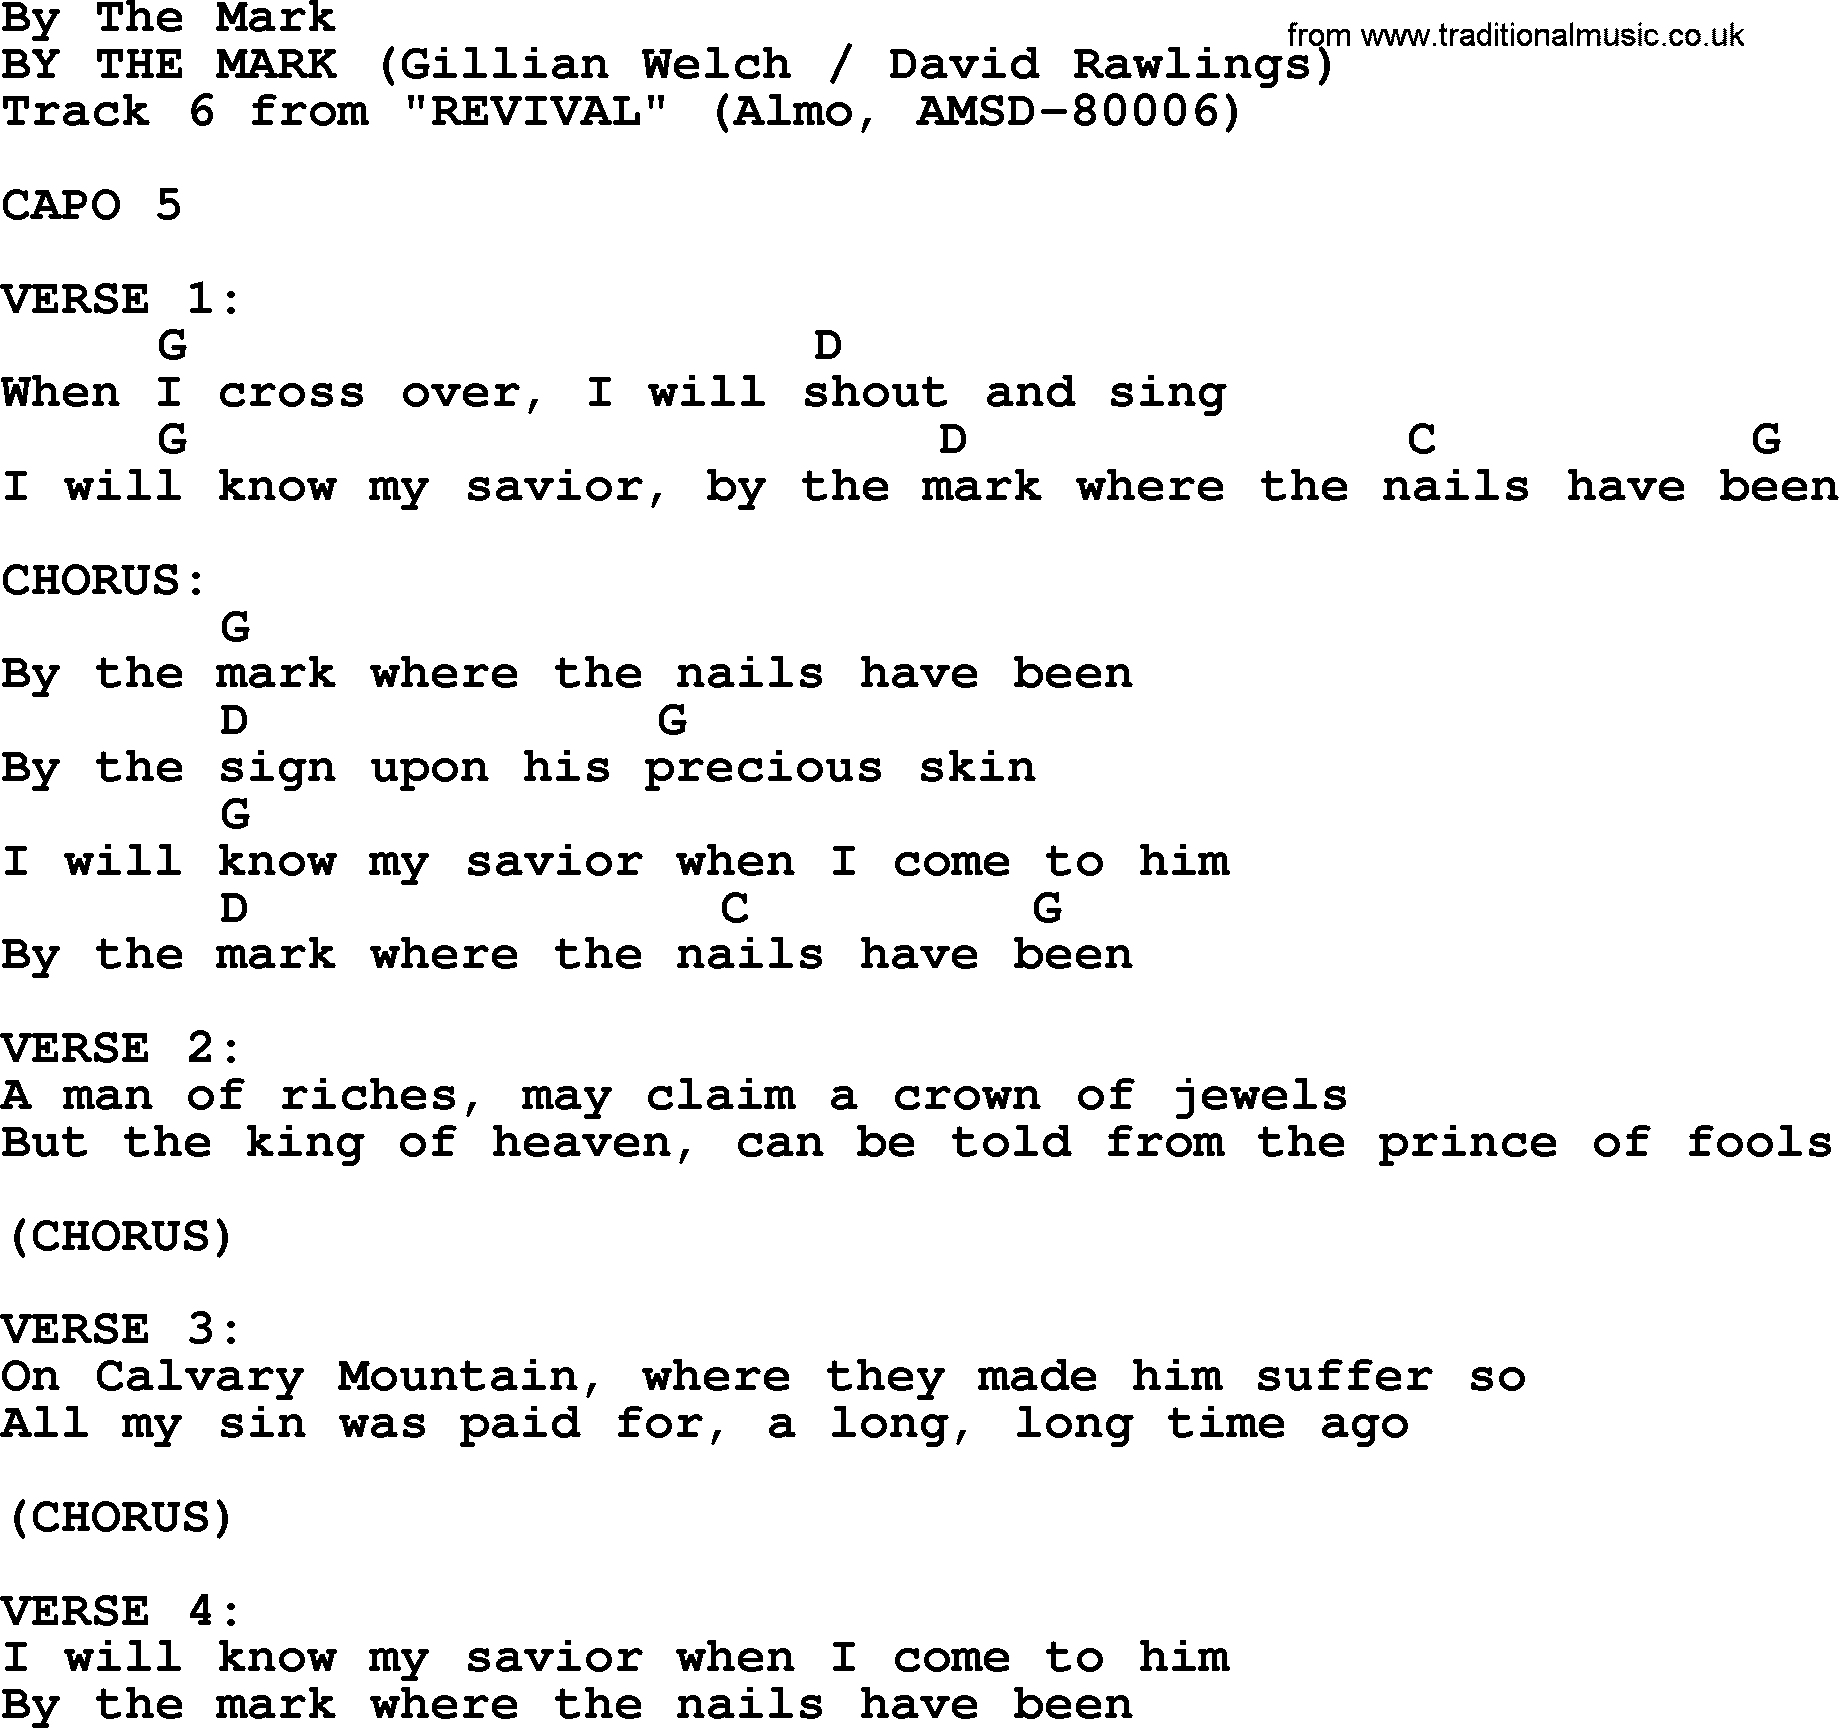 Bluegrass song: By The Mark, lyrics and chords